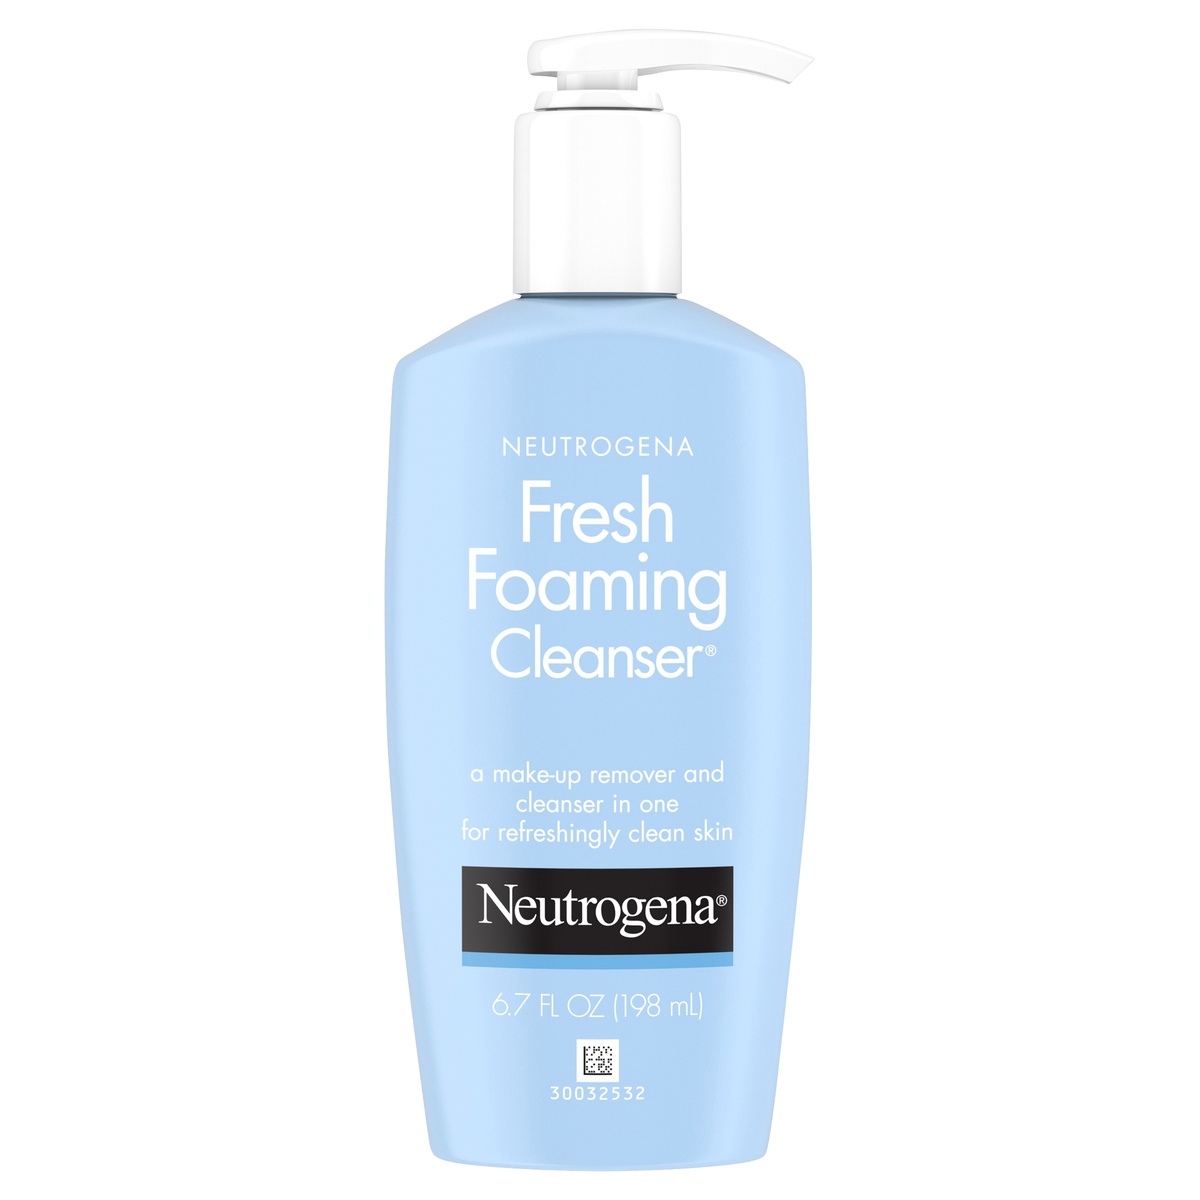 slide 6 of 6, Neutrogena Fresh Foaming Facial Cleanser & Makeup Remover with Glycerin, Oil-, Soap- & Alcohol-Free Daily Face Wash Removes Dirt, Oil & Waterproof Makeup, Non-Comedogenic & Hypoallergenic, 6.7 fl oz